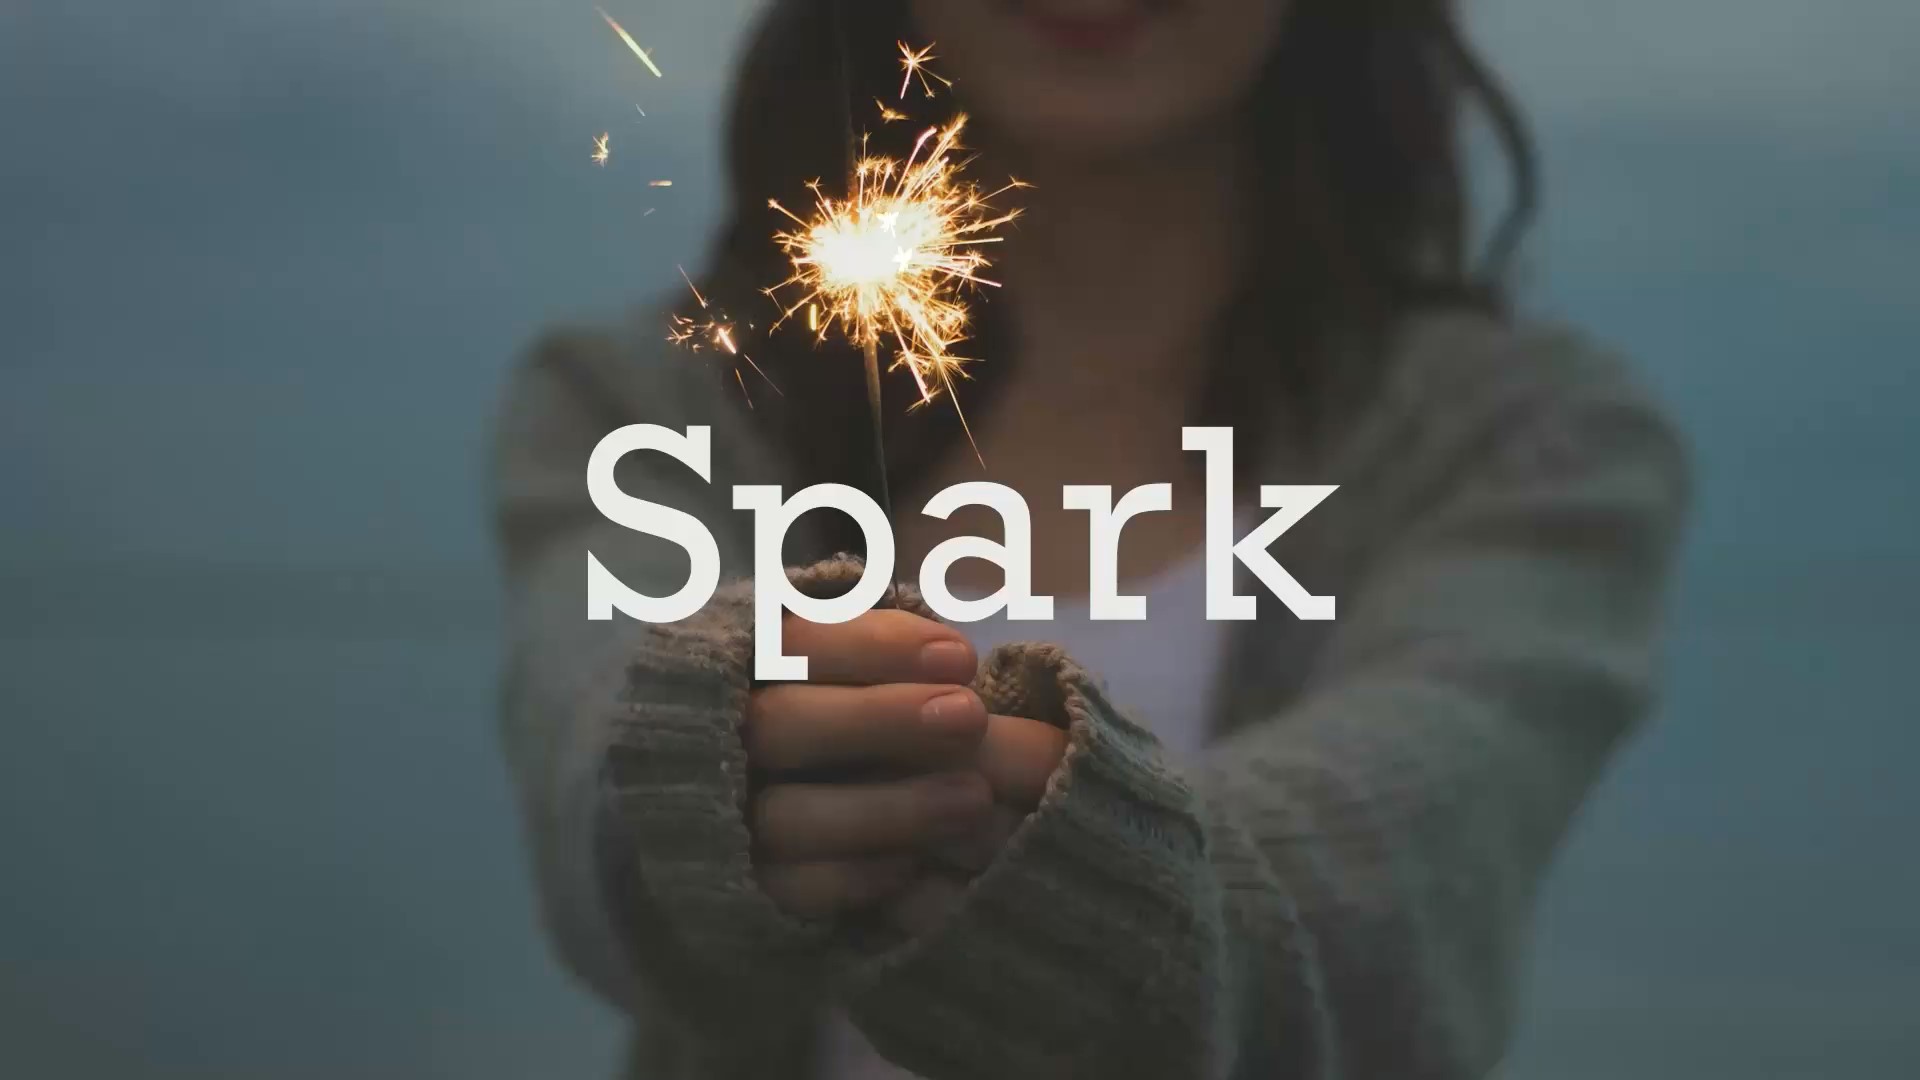 SPARK (A Covid-19 Community Pantry-Inspired Song)